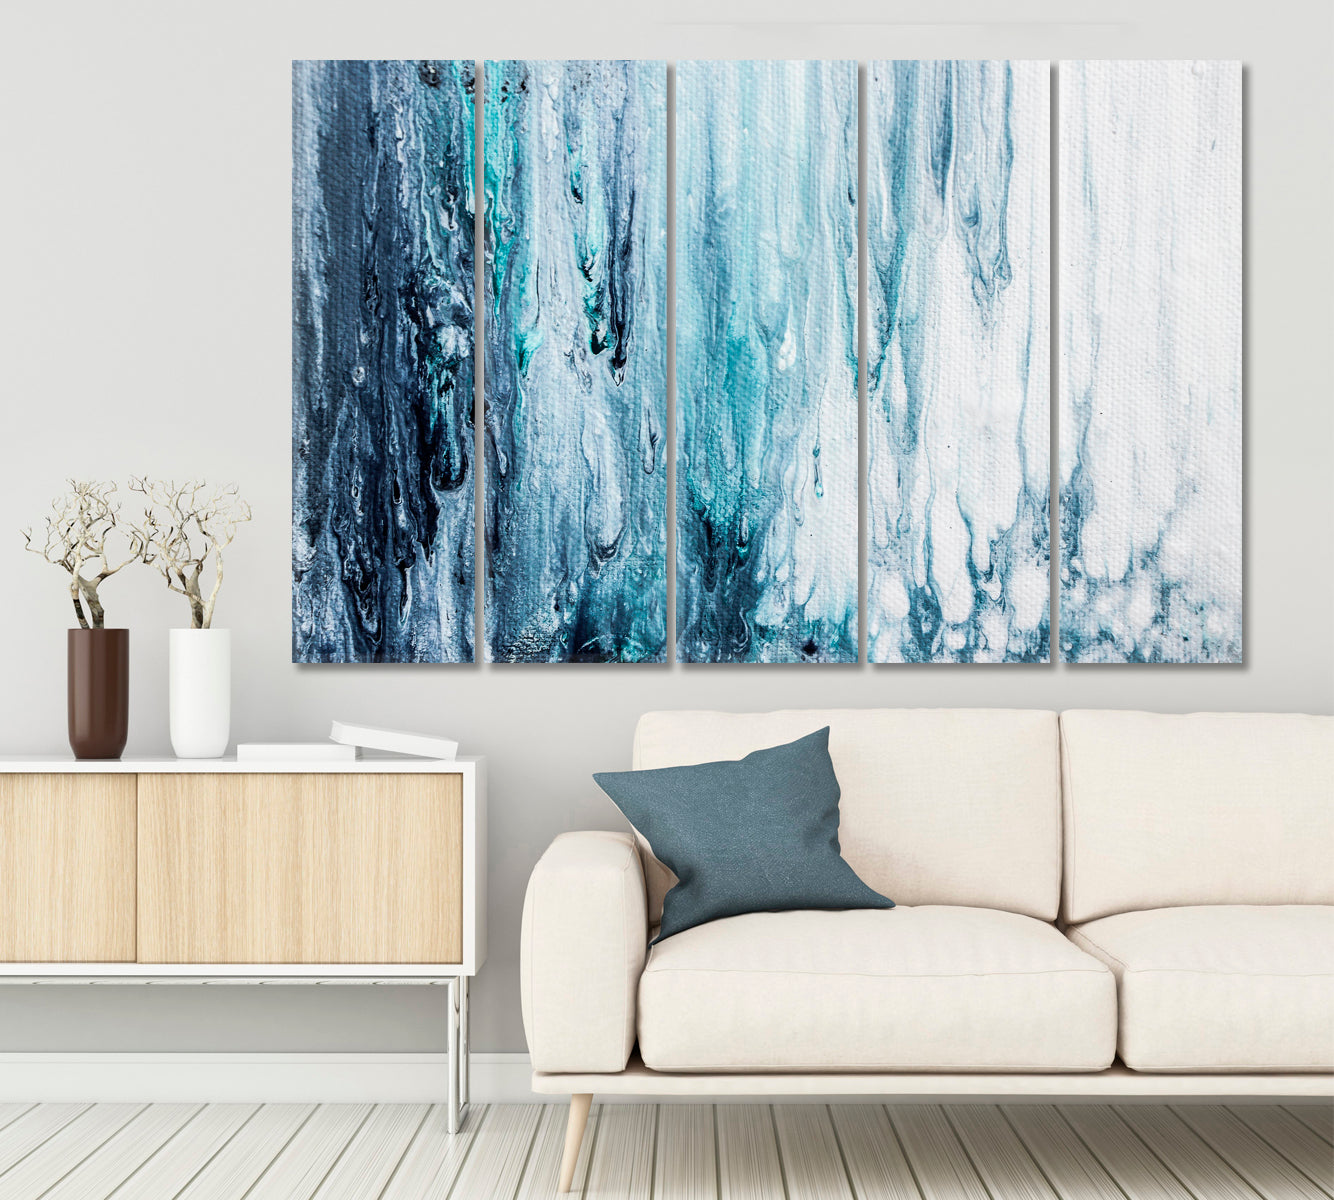 Weeping Paint Blue And White Colors Fluid Art, Oriental Marbling Canvas Print Artesty 5 panels 36" x 24" 